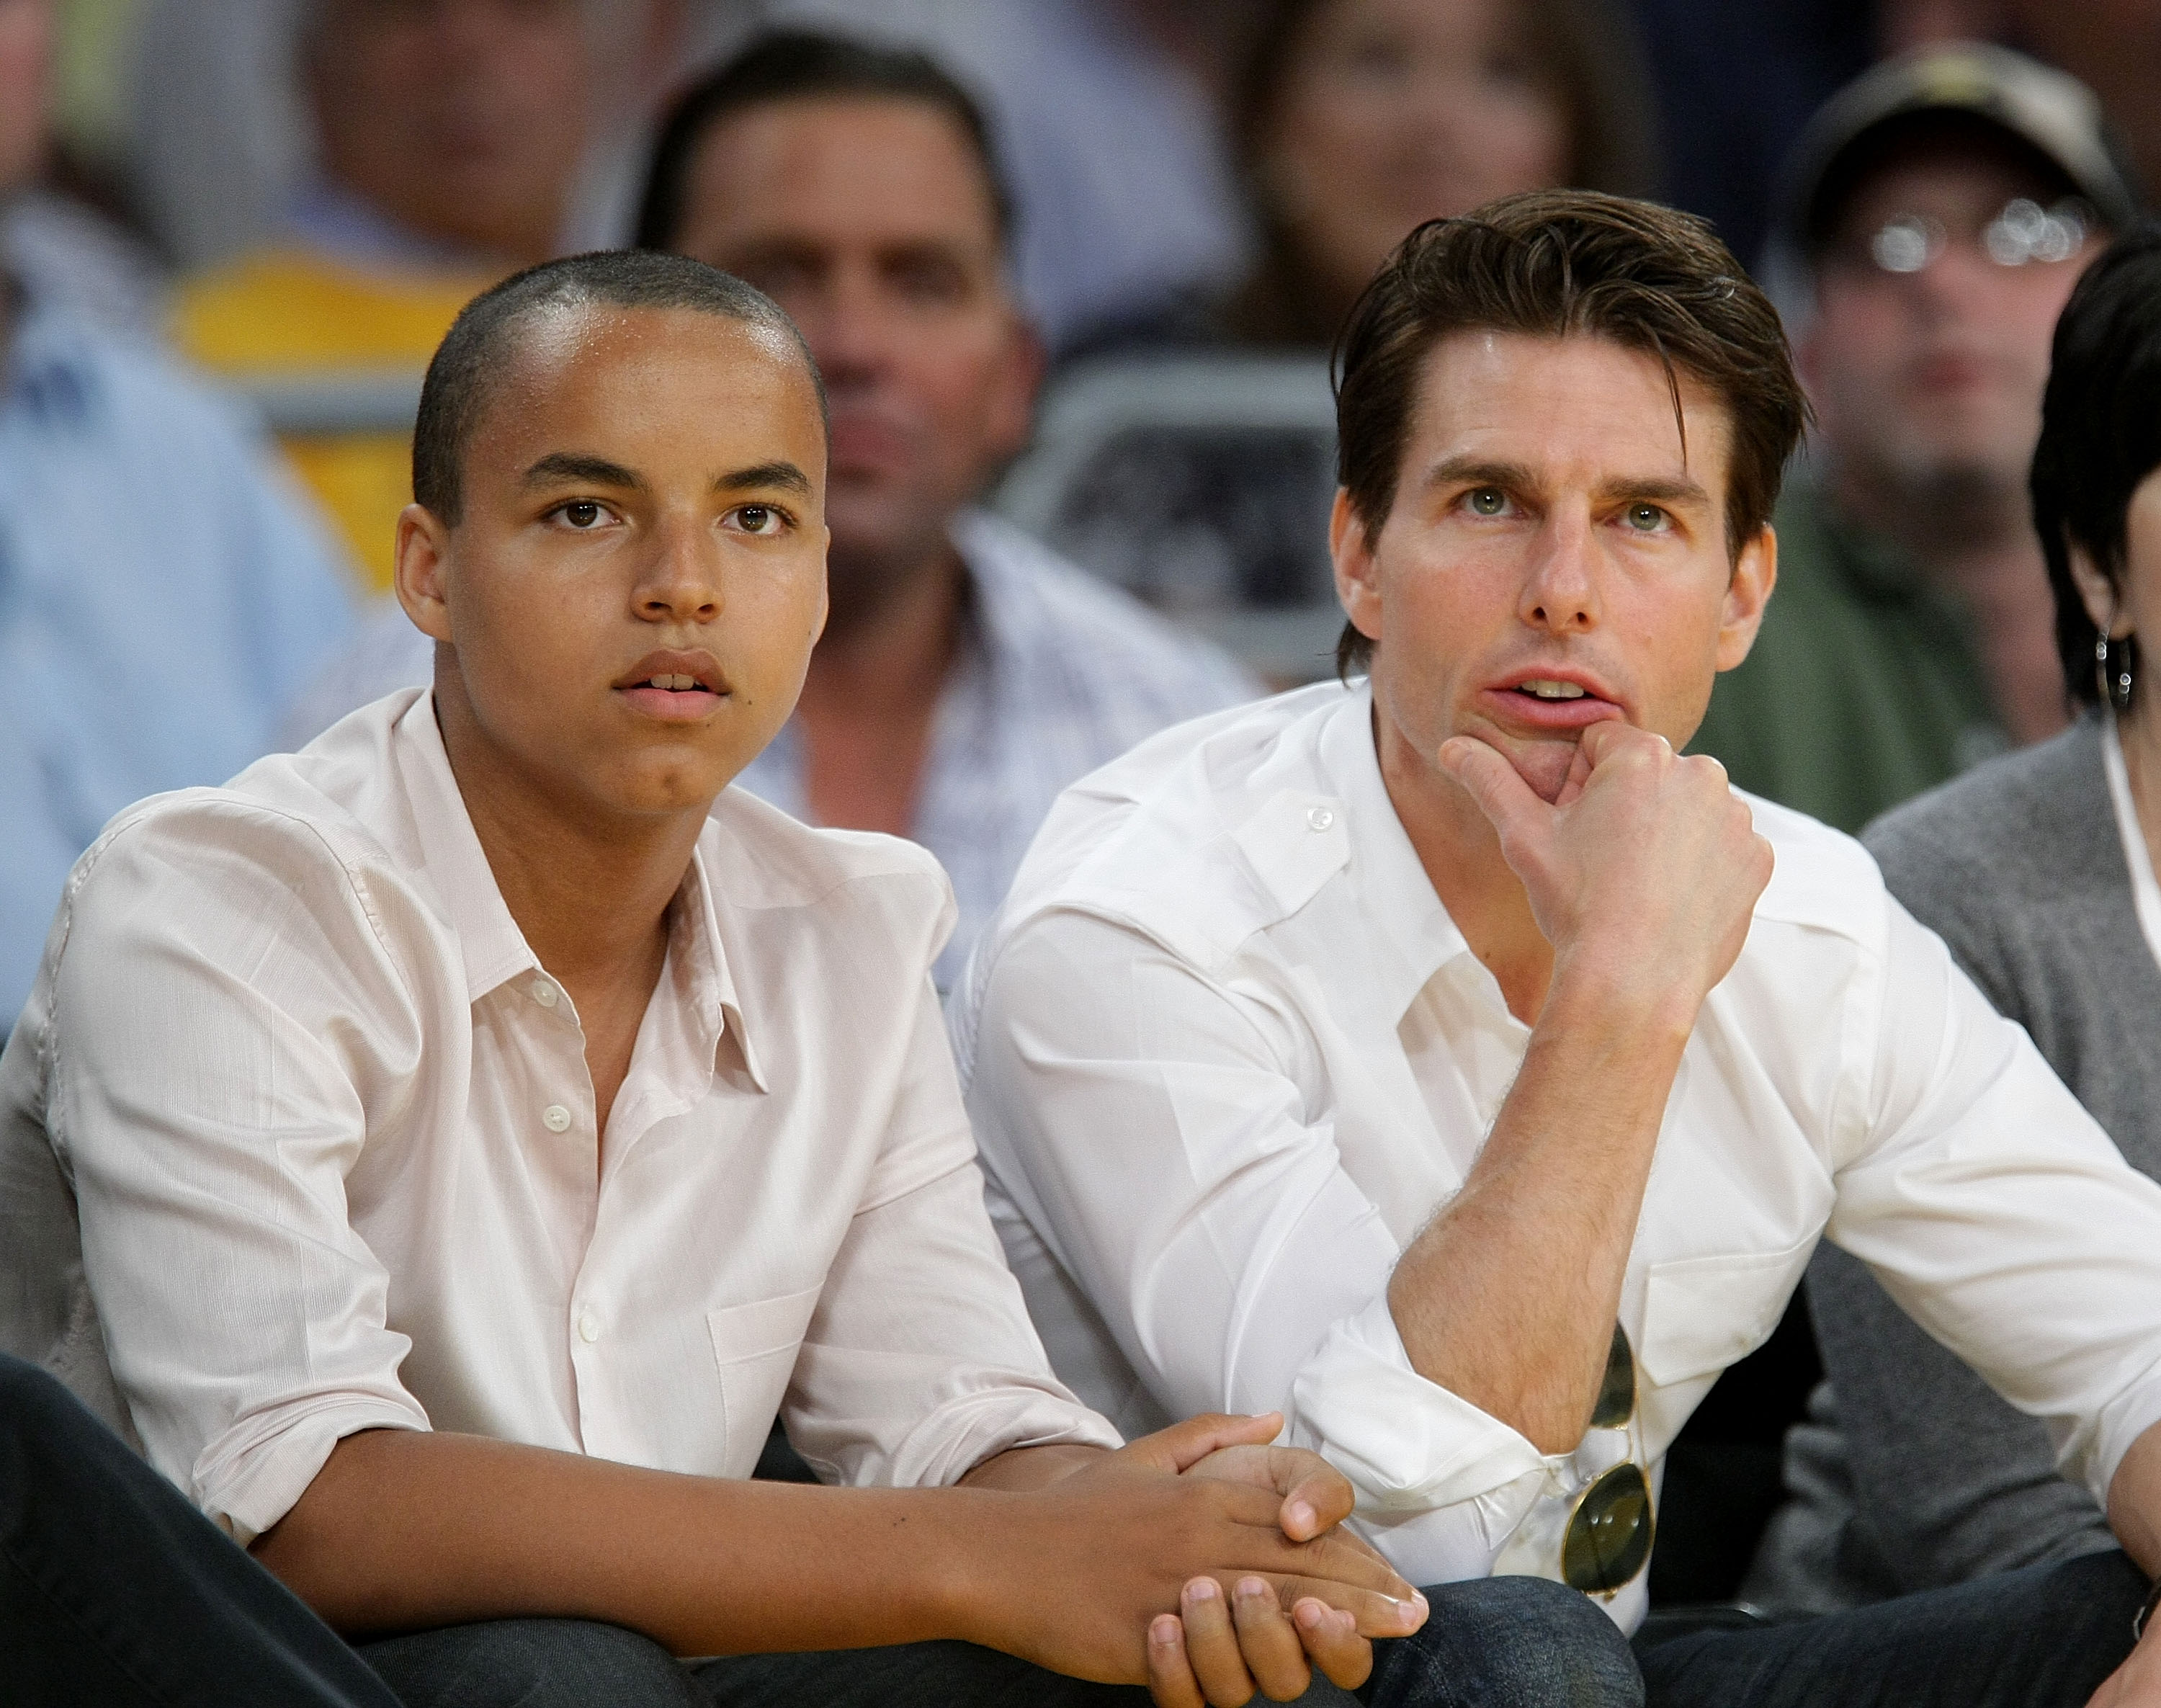 Connor and Tom Cruise at the 2009 NBA Playoffs between the Los Angeles Lakers and the Denver Nuggets on May 21, 2009, in Los Angeles, California. | Source: Getty Images